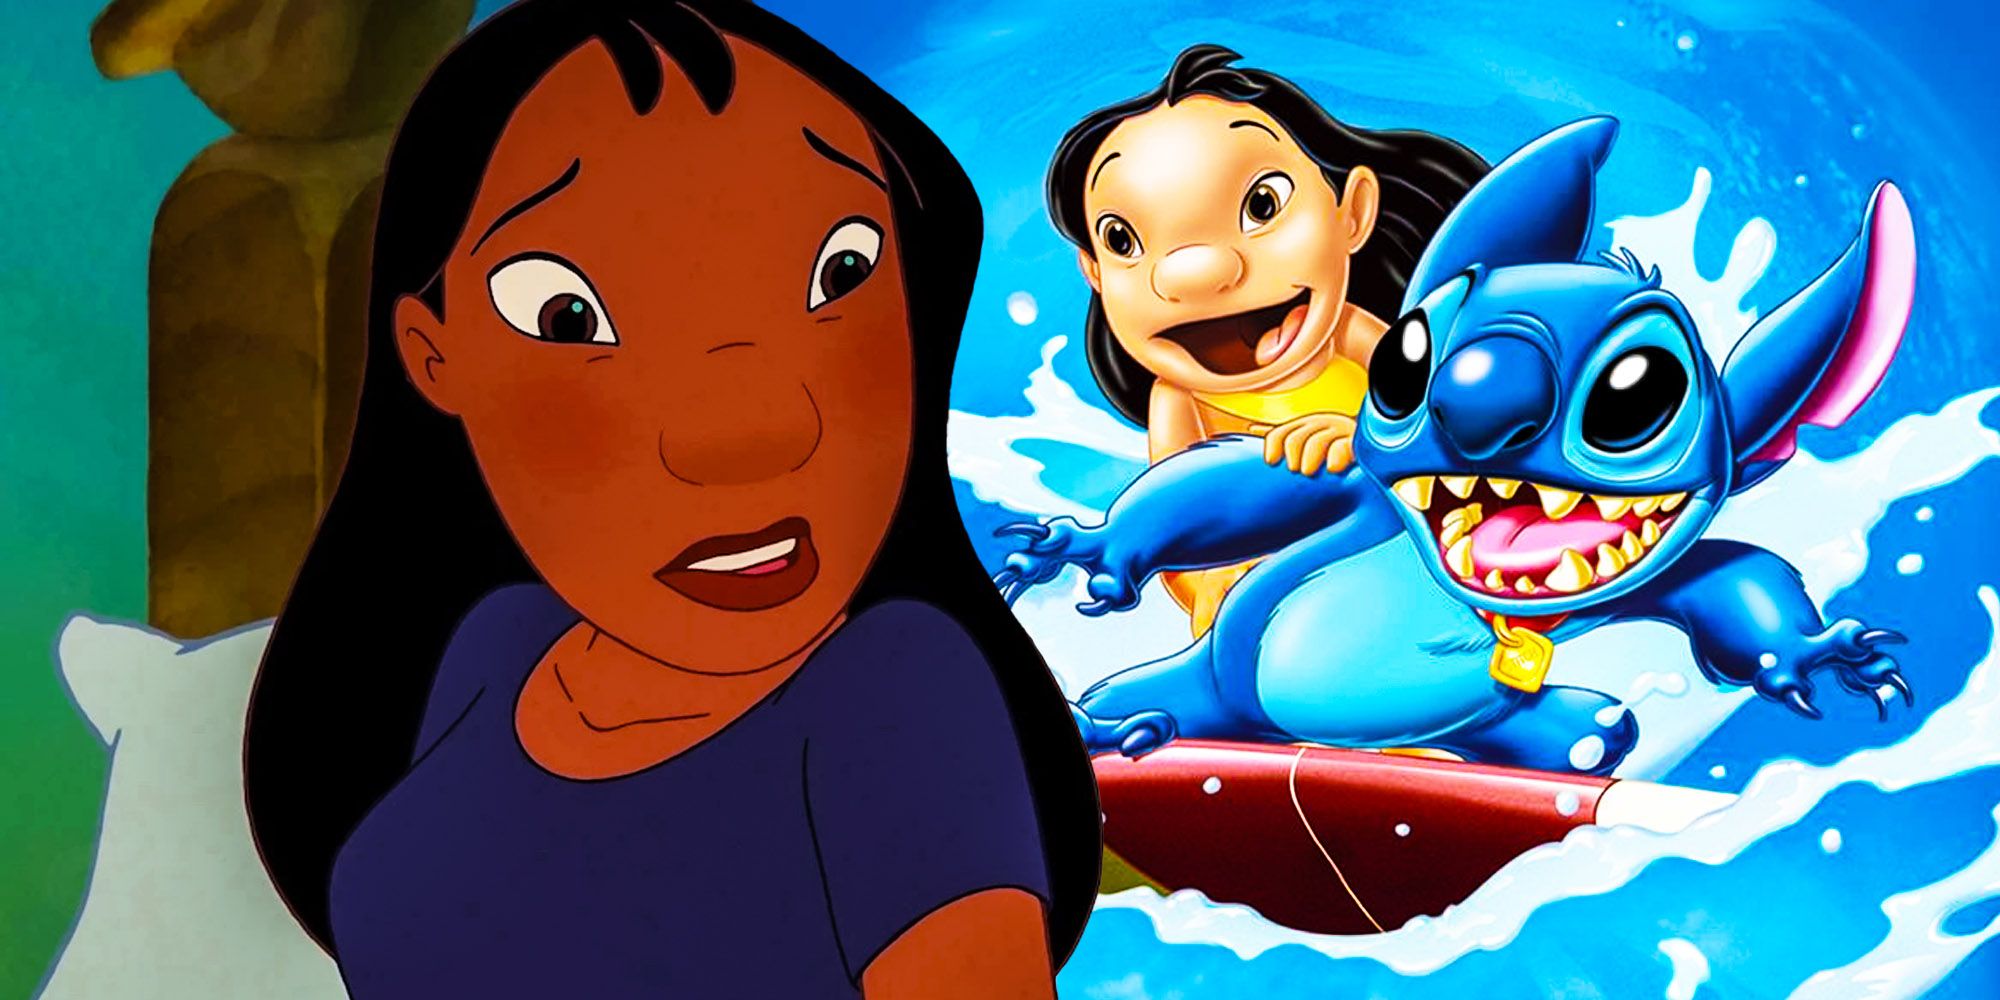 Why Disney Is Getting Backlash For Lilo & Stich's Live-Action Cast